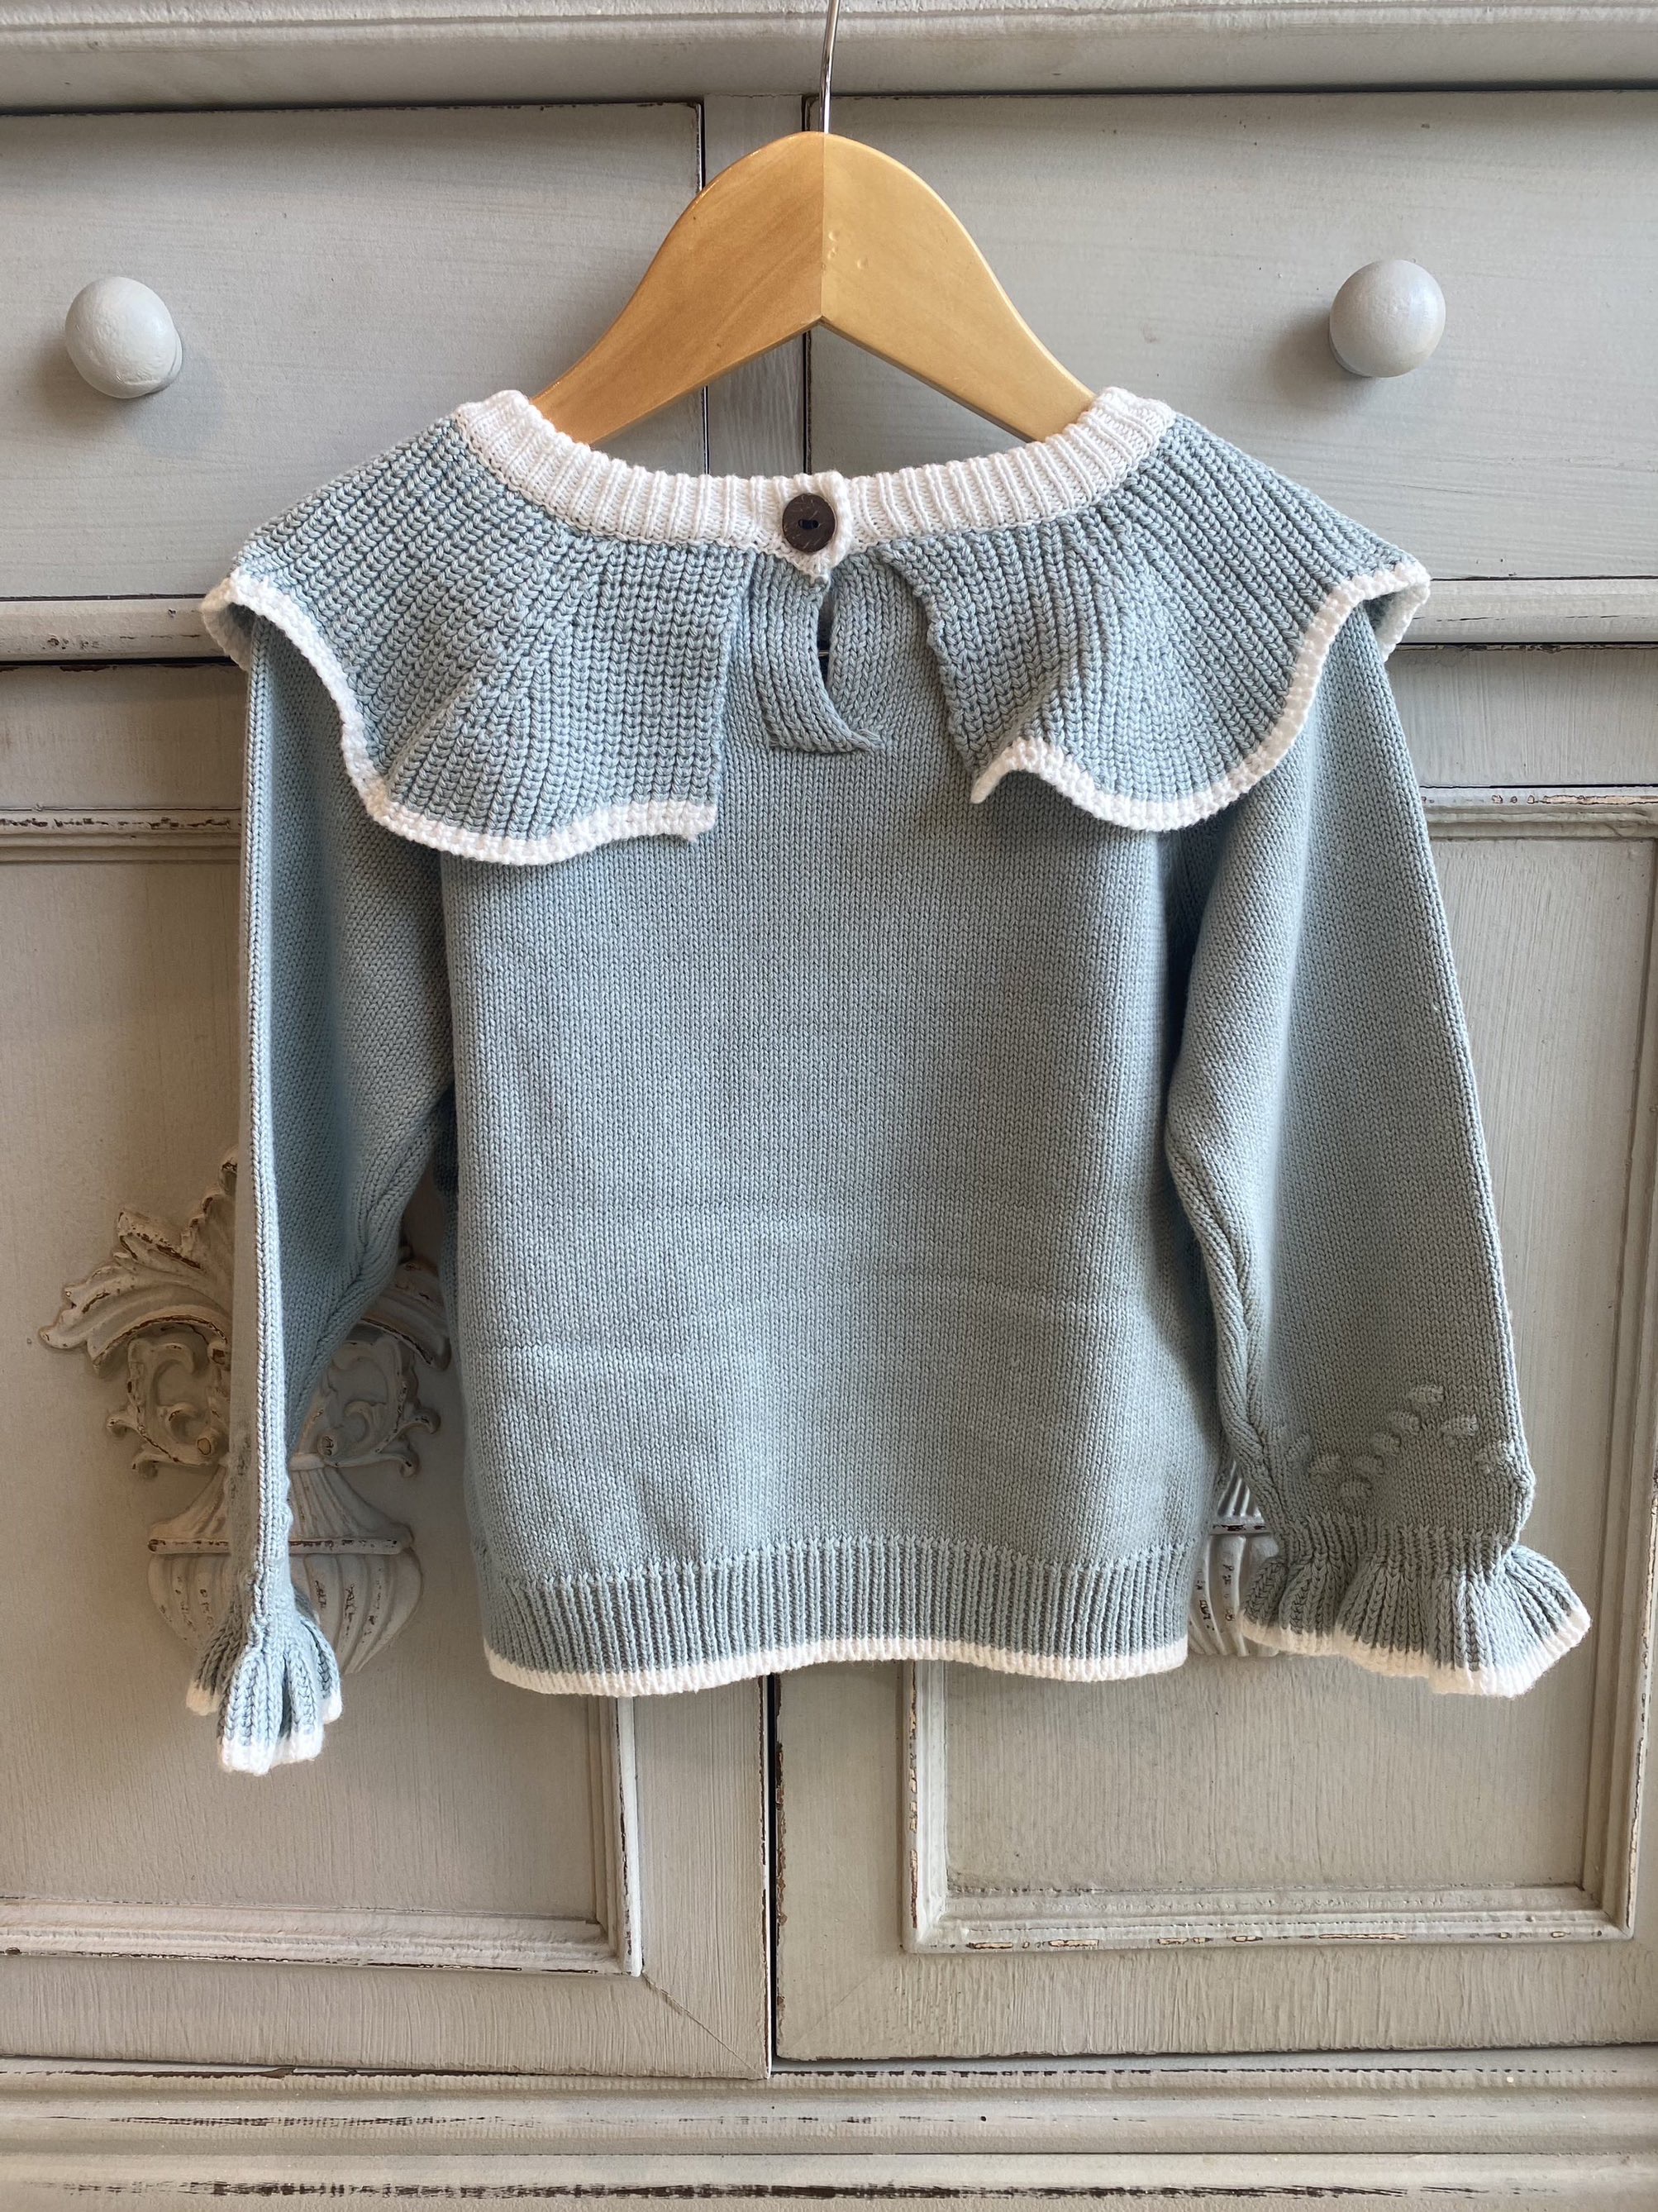 the back of a blue knitted winter toddler girls jumper. Retro style;e with white trim and frilly collar and cuffs.